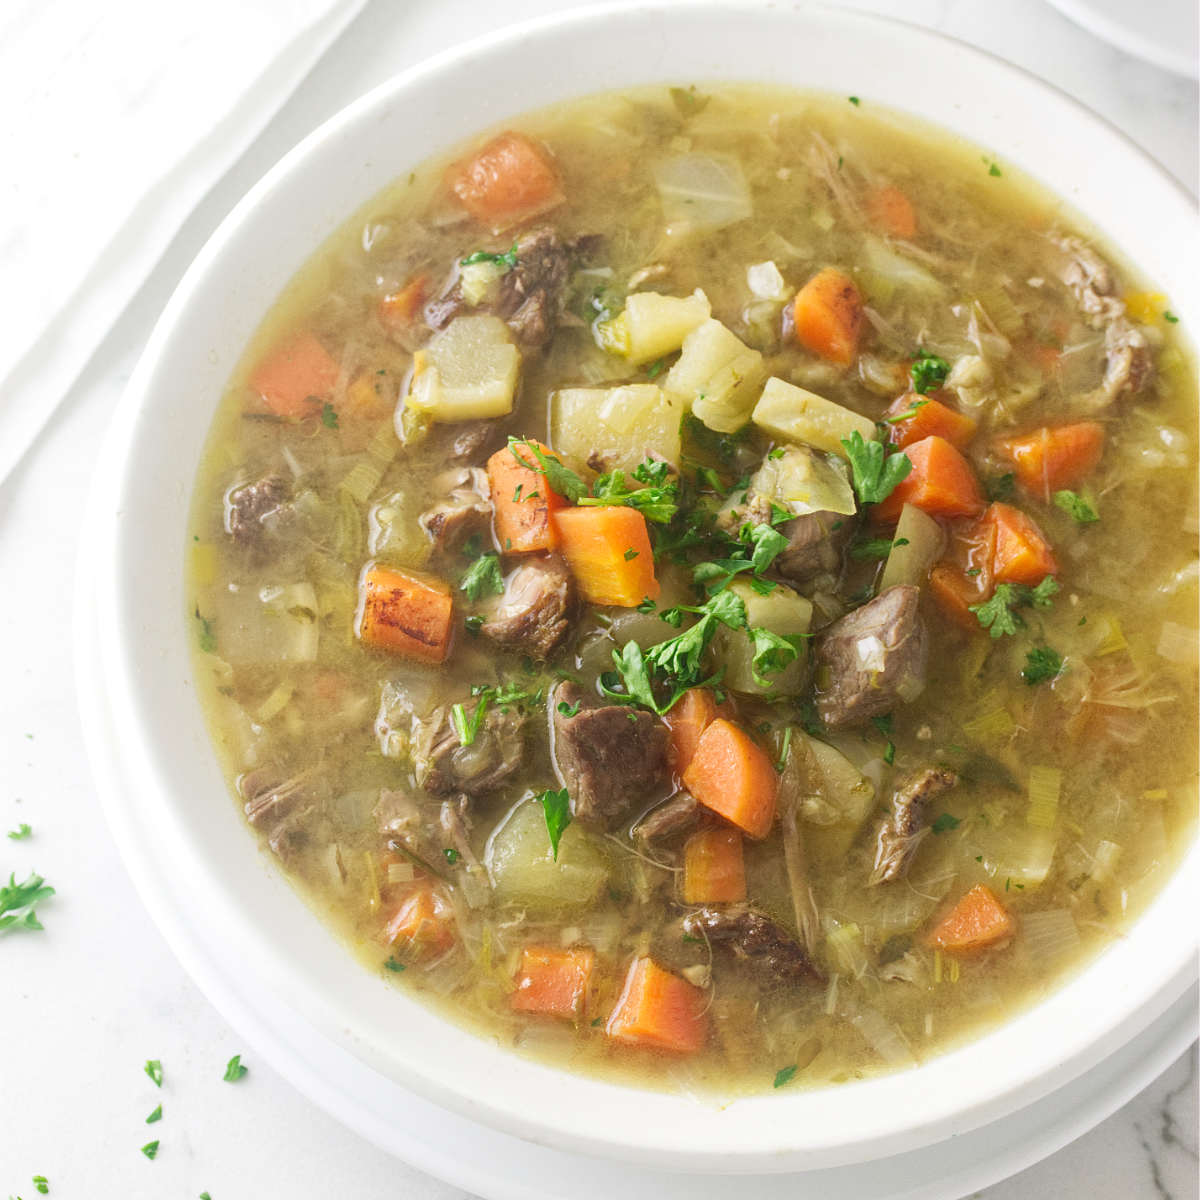 A bowl of Scotch broth showing chunks of lamb and vegetables.